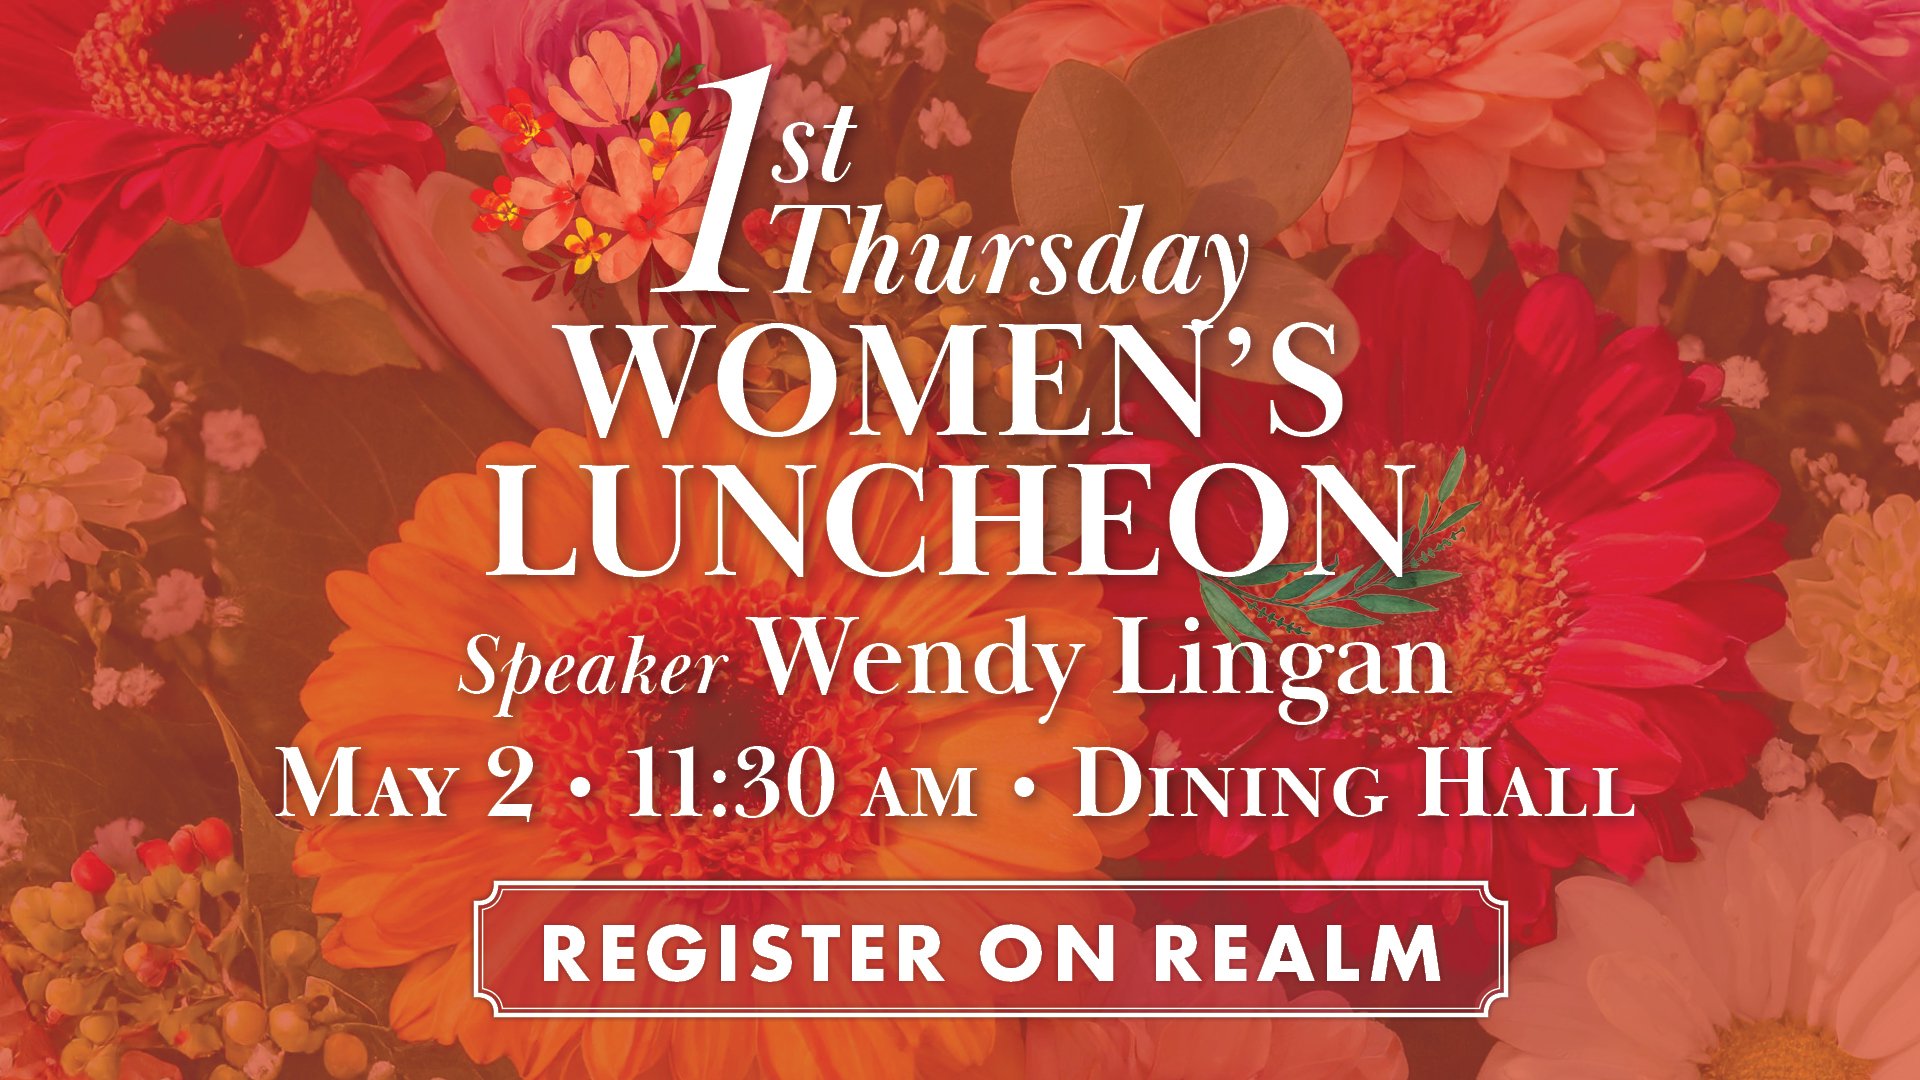 Tomorrow we are delighted to welcome our featured speaker, WHPC Member and Deacon, Wendy Lingan at the 1st Thursday Women's Luncheon!

Wendy has been attending WHPC for 12 years with her husband, Chris. She is a working mother of 3 tween thru college